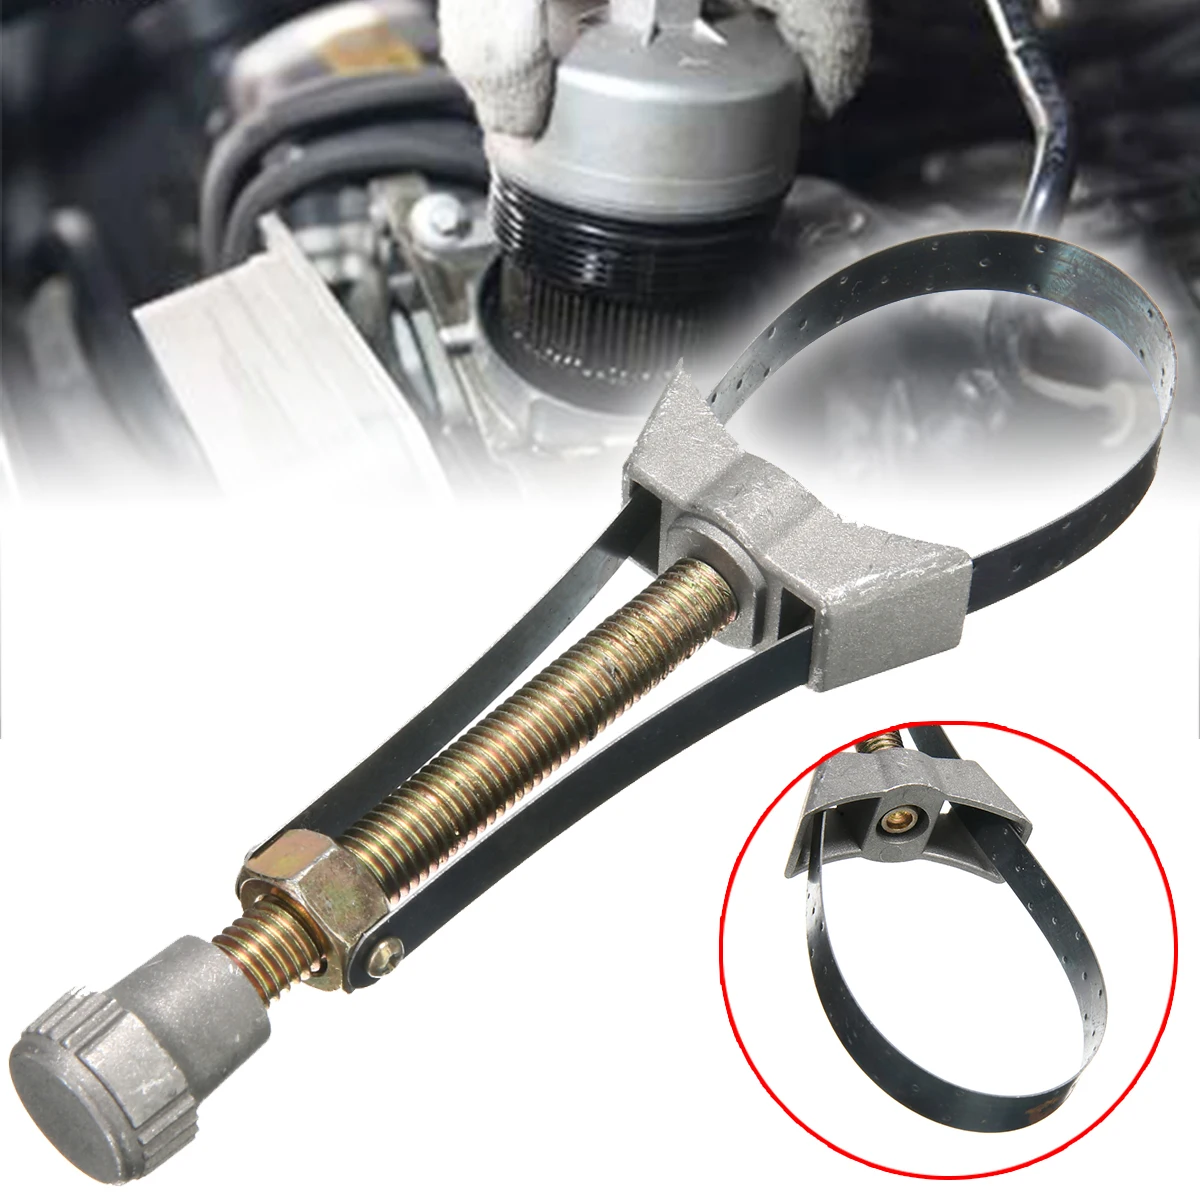 

New Car Auto Oil Filter Removal Tool Strap Wrench 60mm To 120mm Diameter Adjustable Disassembly Repair Tools